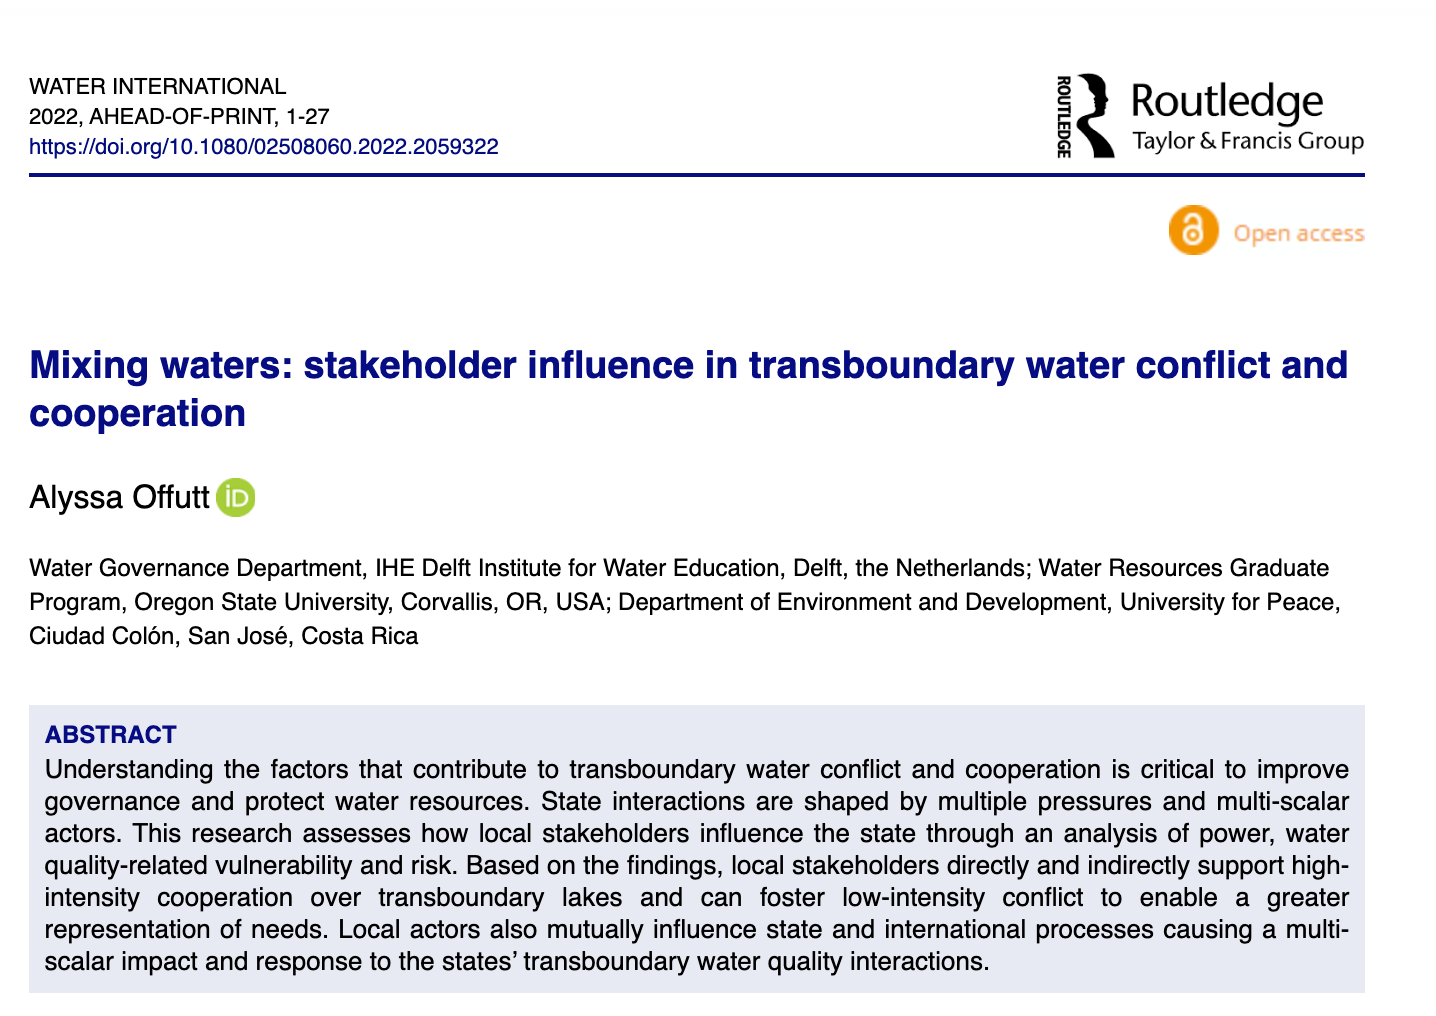 Mixing waters: stakeholder influence in transboundary water conflict and cooperation